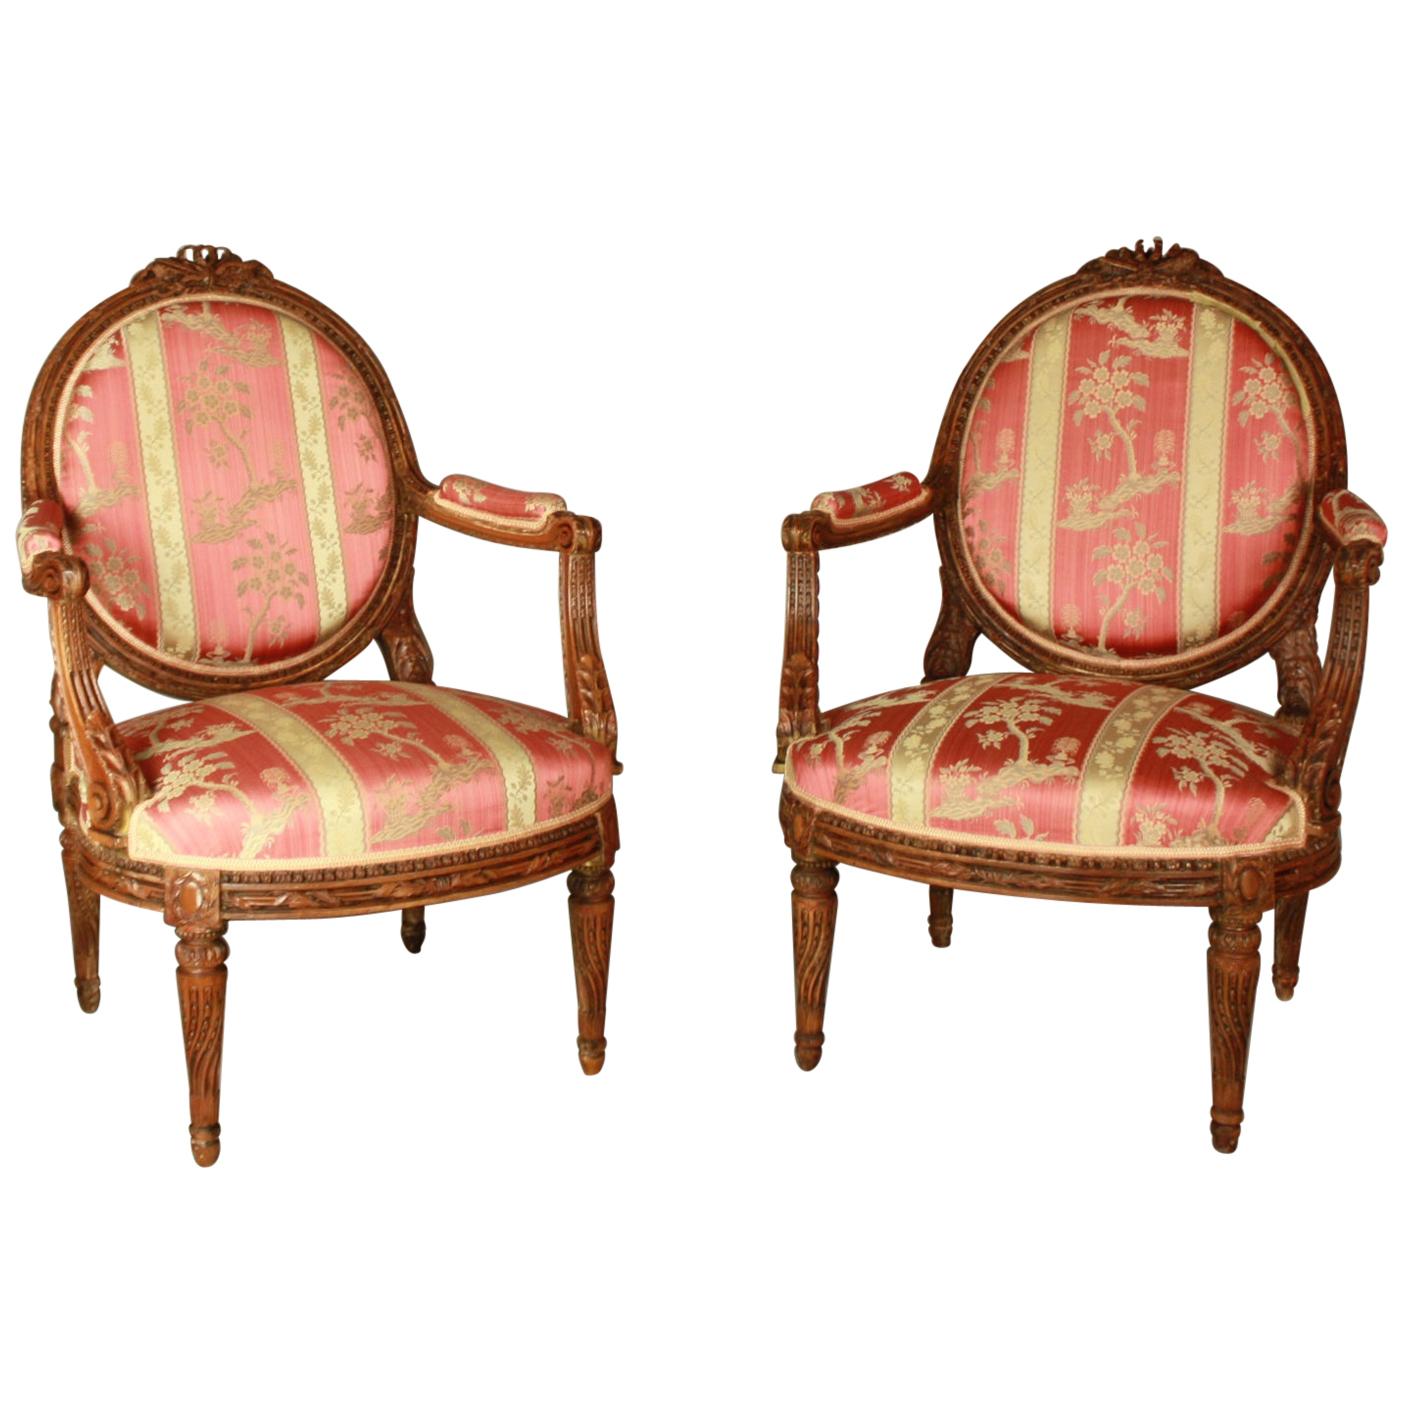 Pair of 19th Ct. Louis XVI Style Walnut Fauteuils or Armchairs after J.-R. Nadal